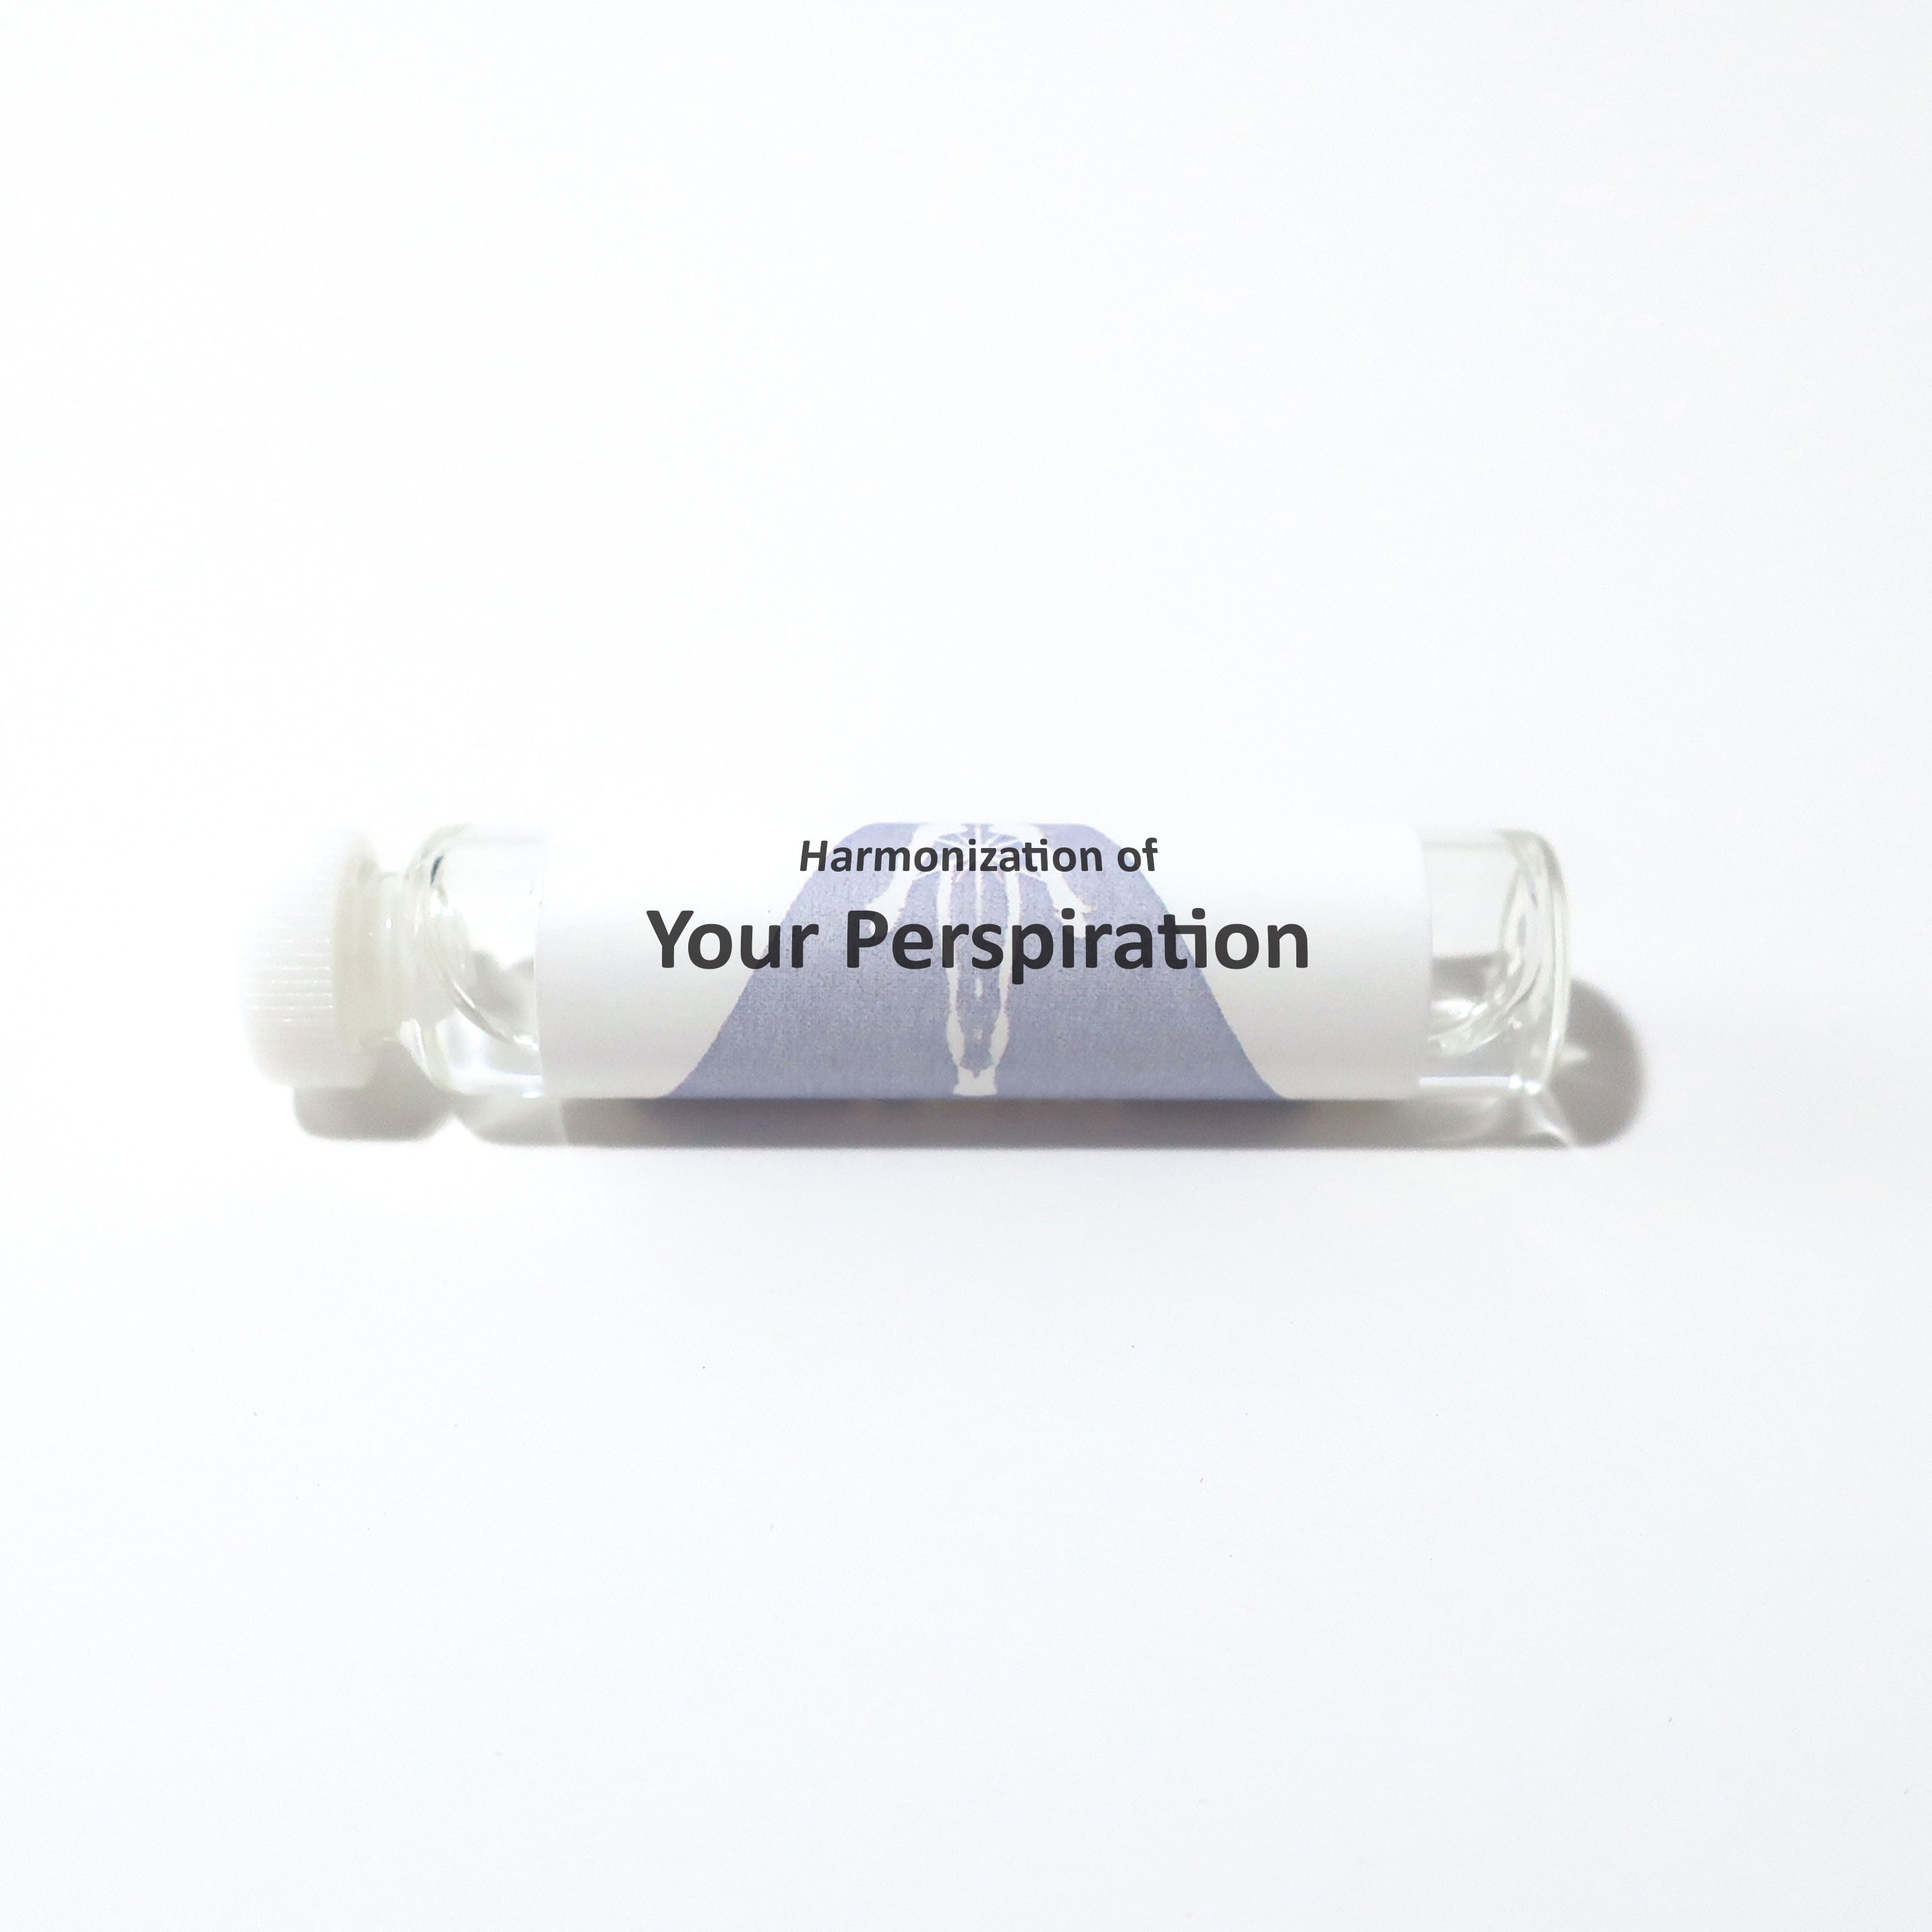 Your Perspiration